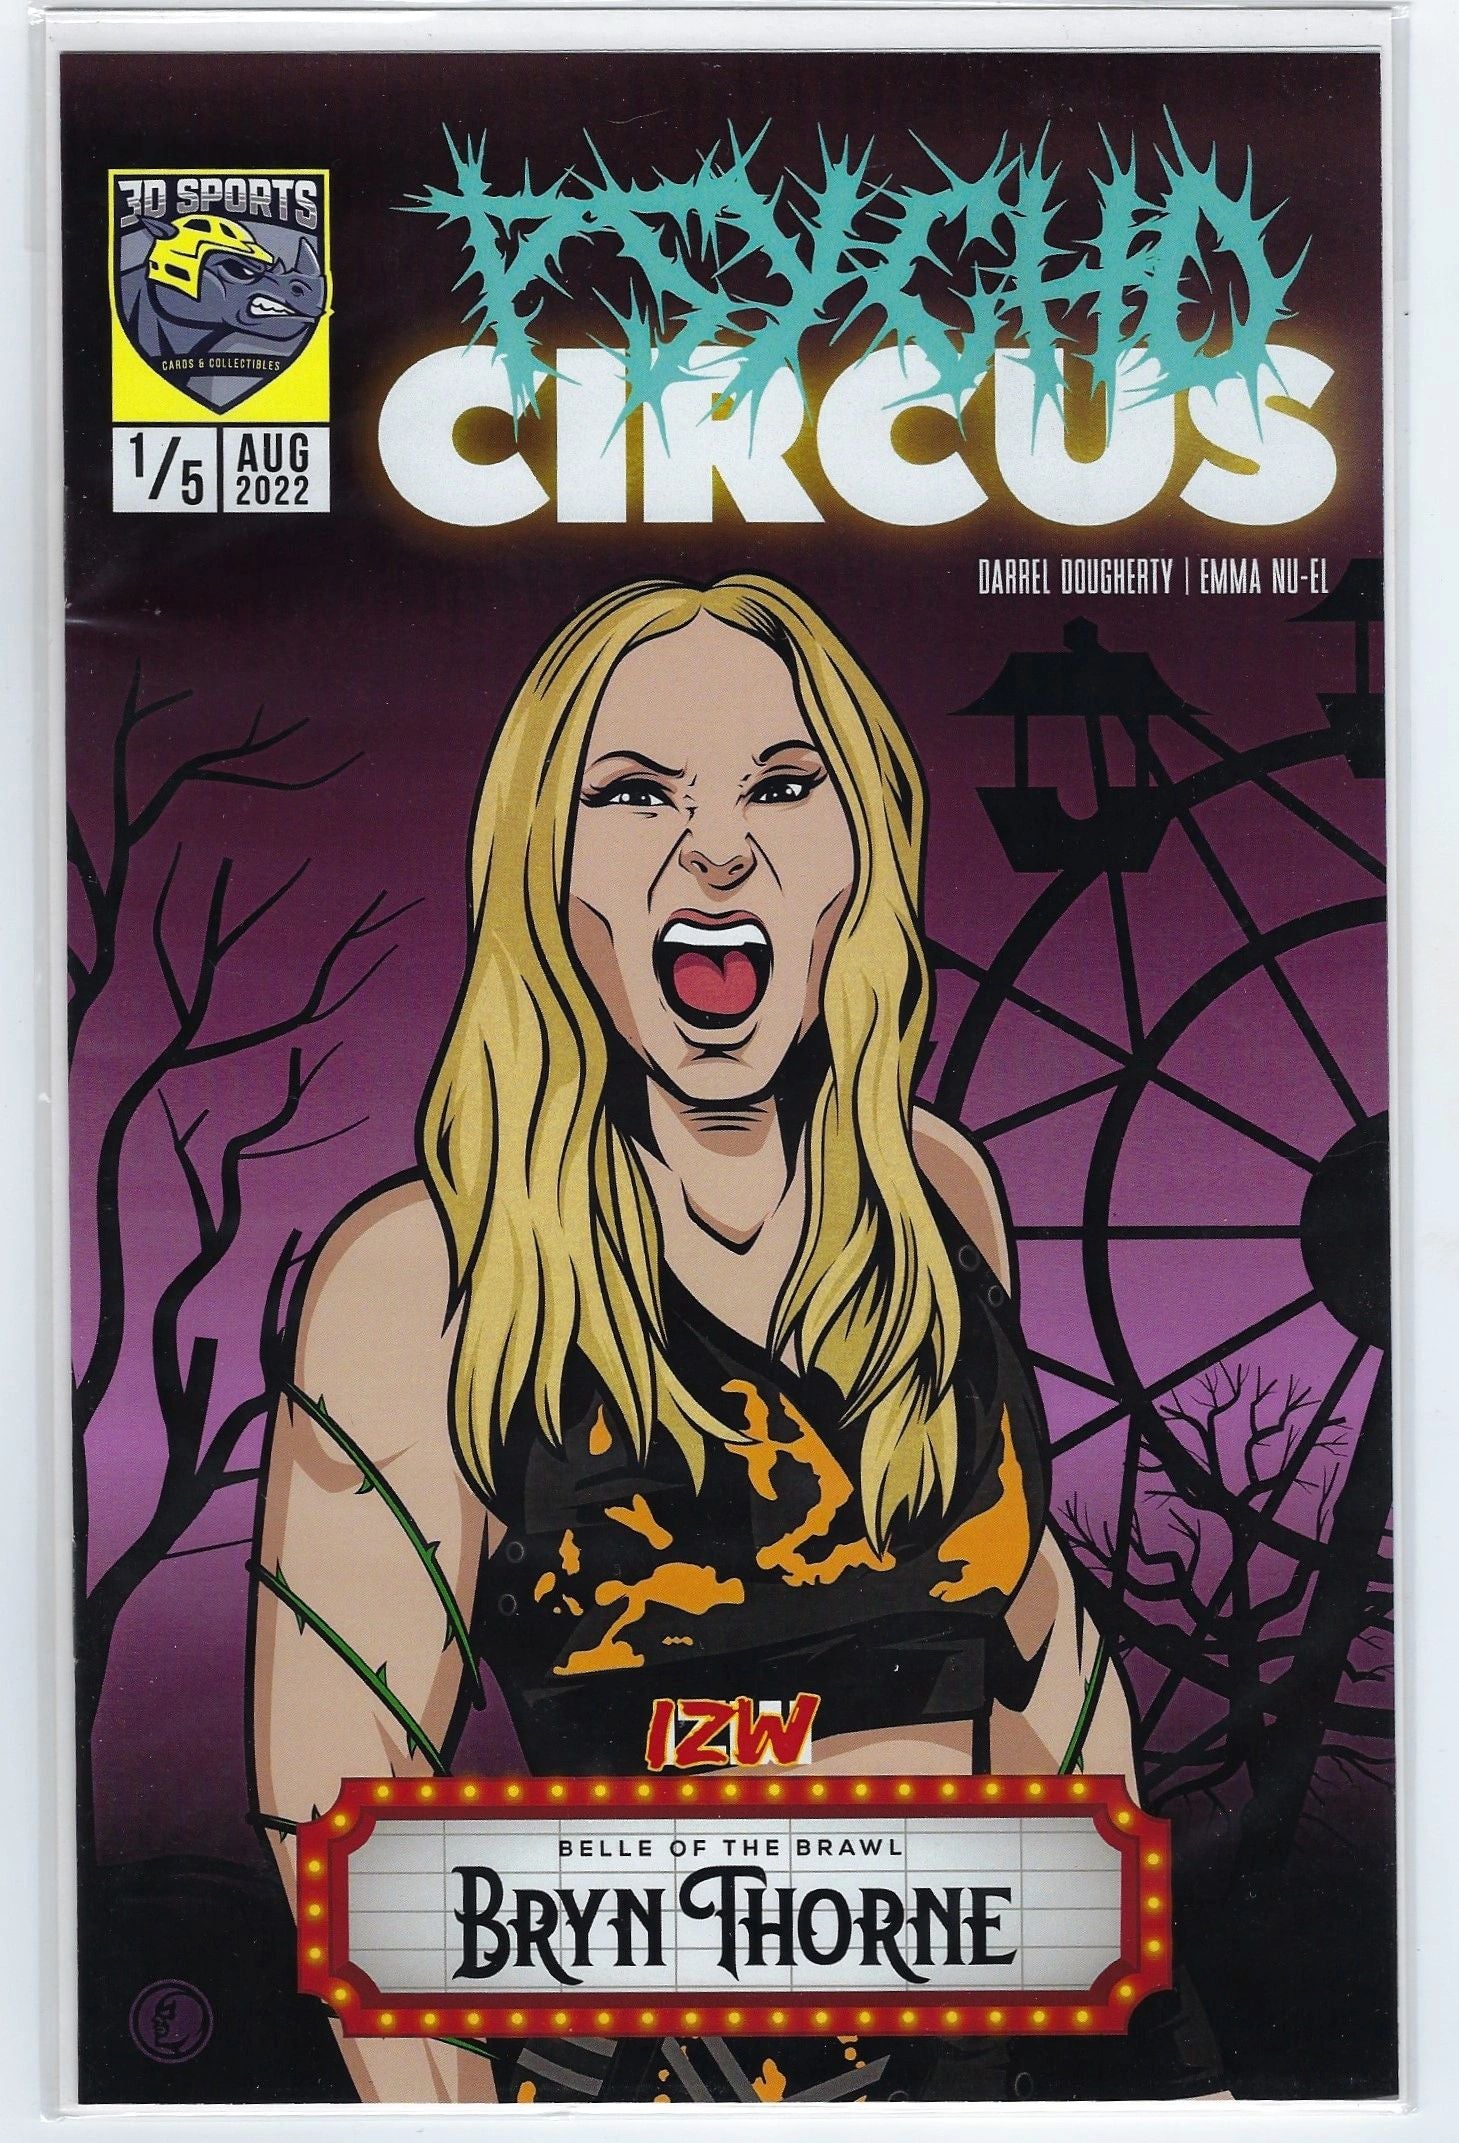 Bryn Thorne "Belle of the Brawl" IZW Psycho Circus Comic Book Cover 1/5